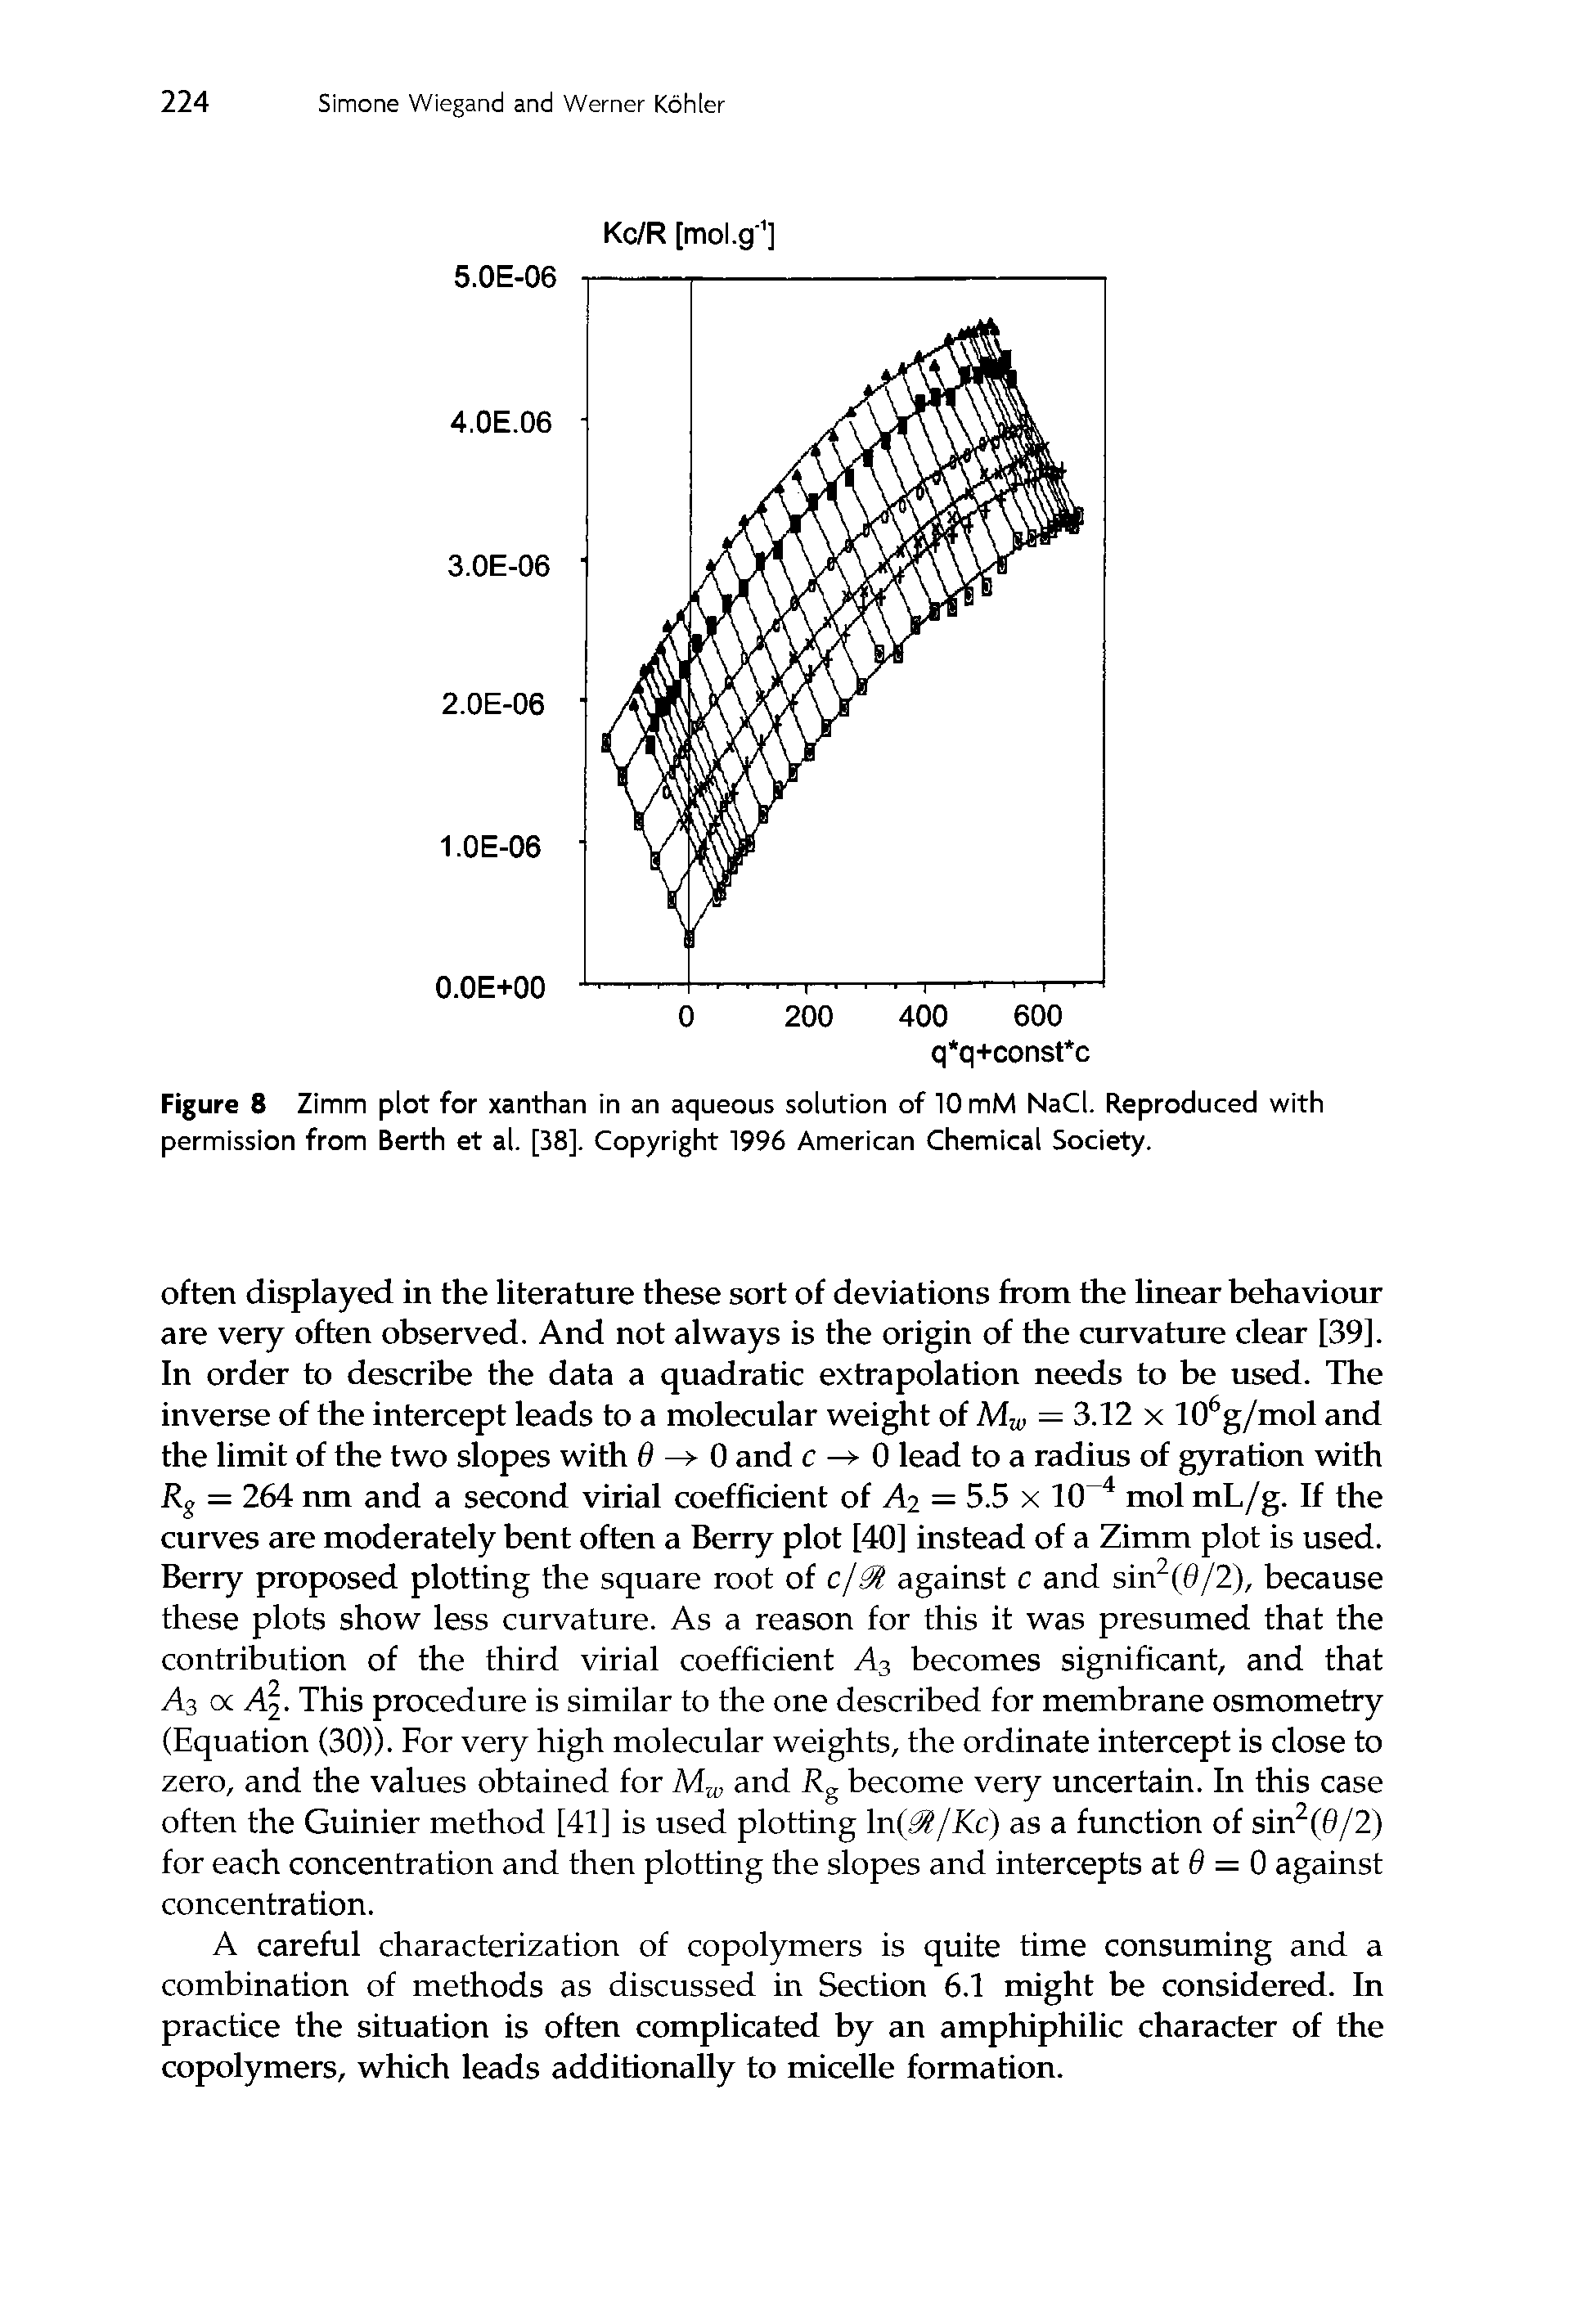 Figure 8 Zimm plot for xanthan in an aqueous solution of 10 mM NaCl. Reproduced with permission from Berth et al. [38]. Copyright 1996 American Chemical Society.